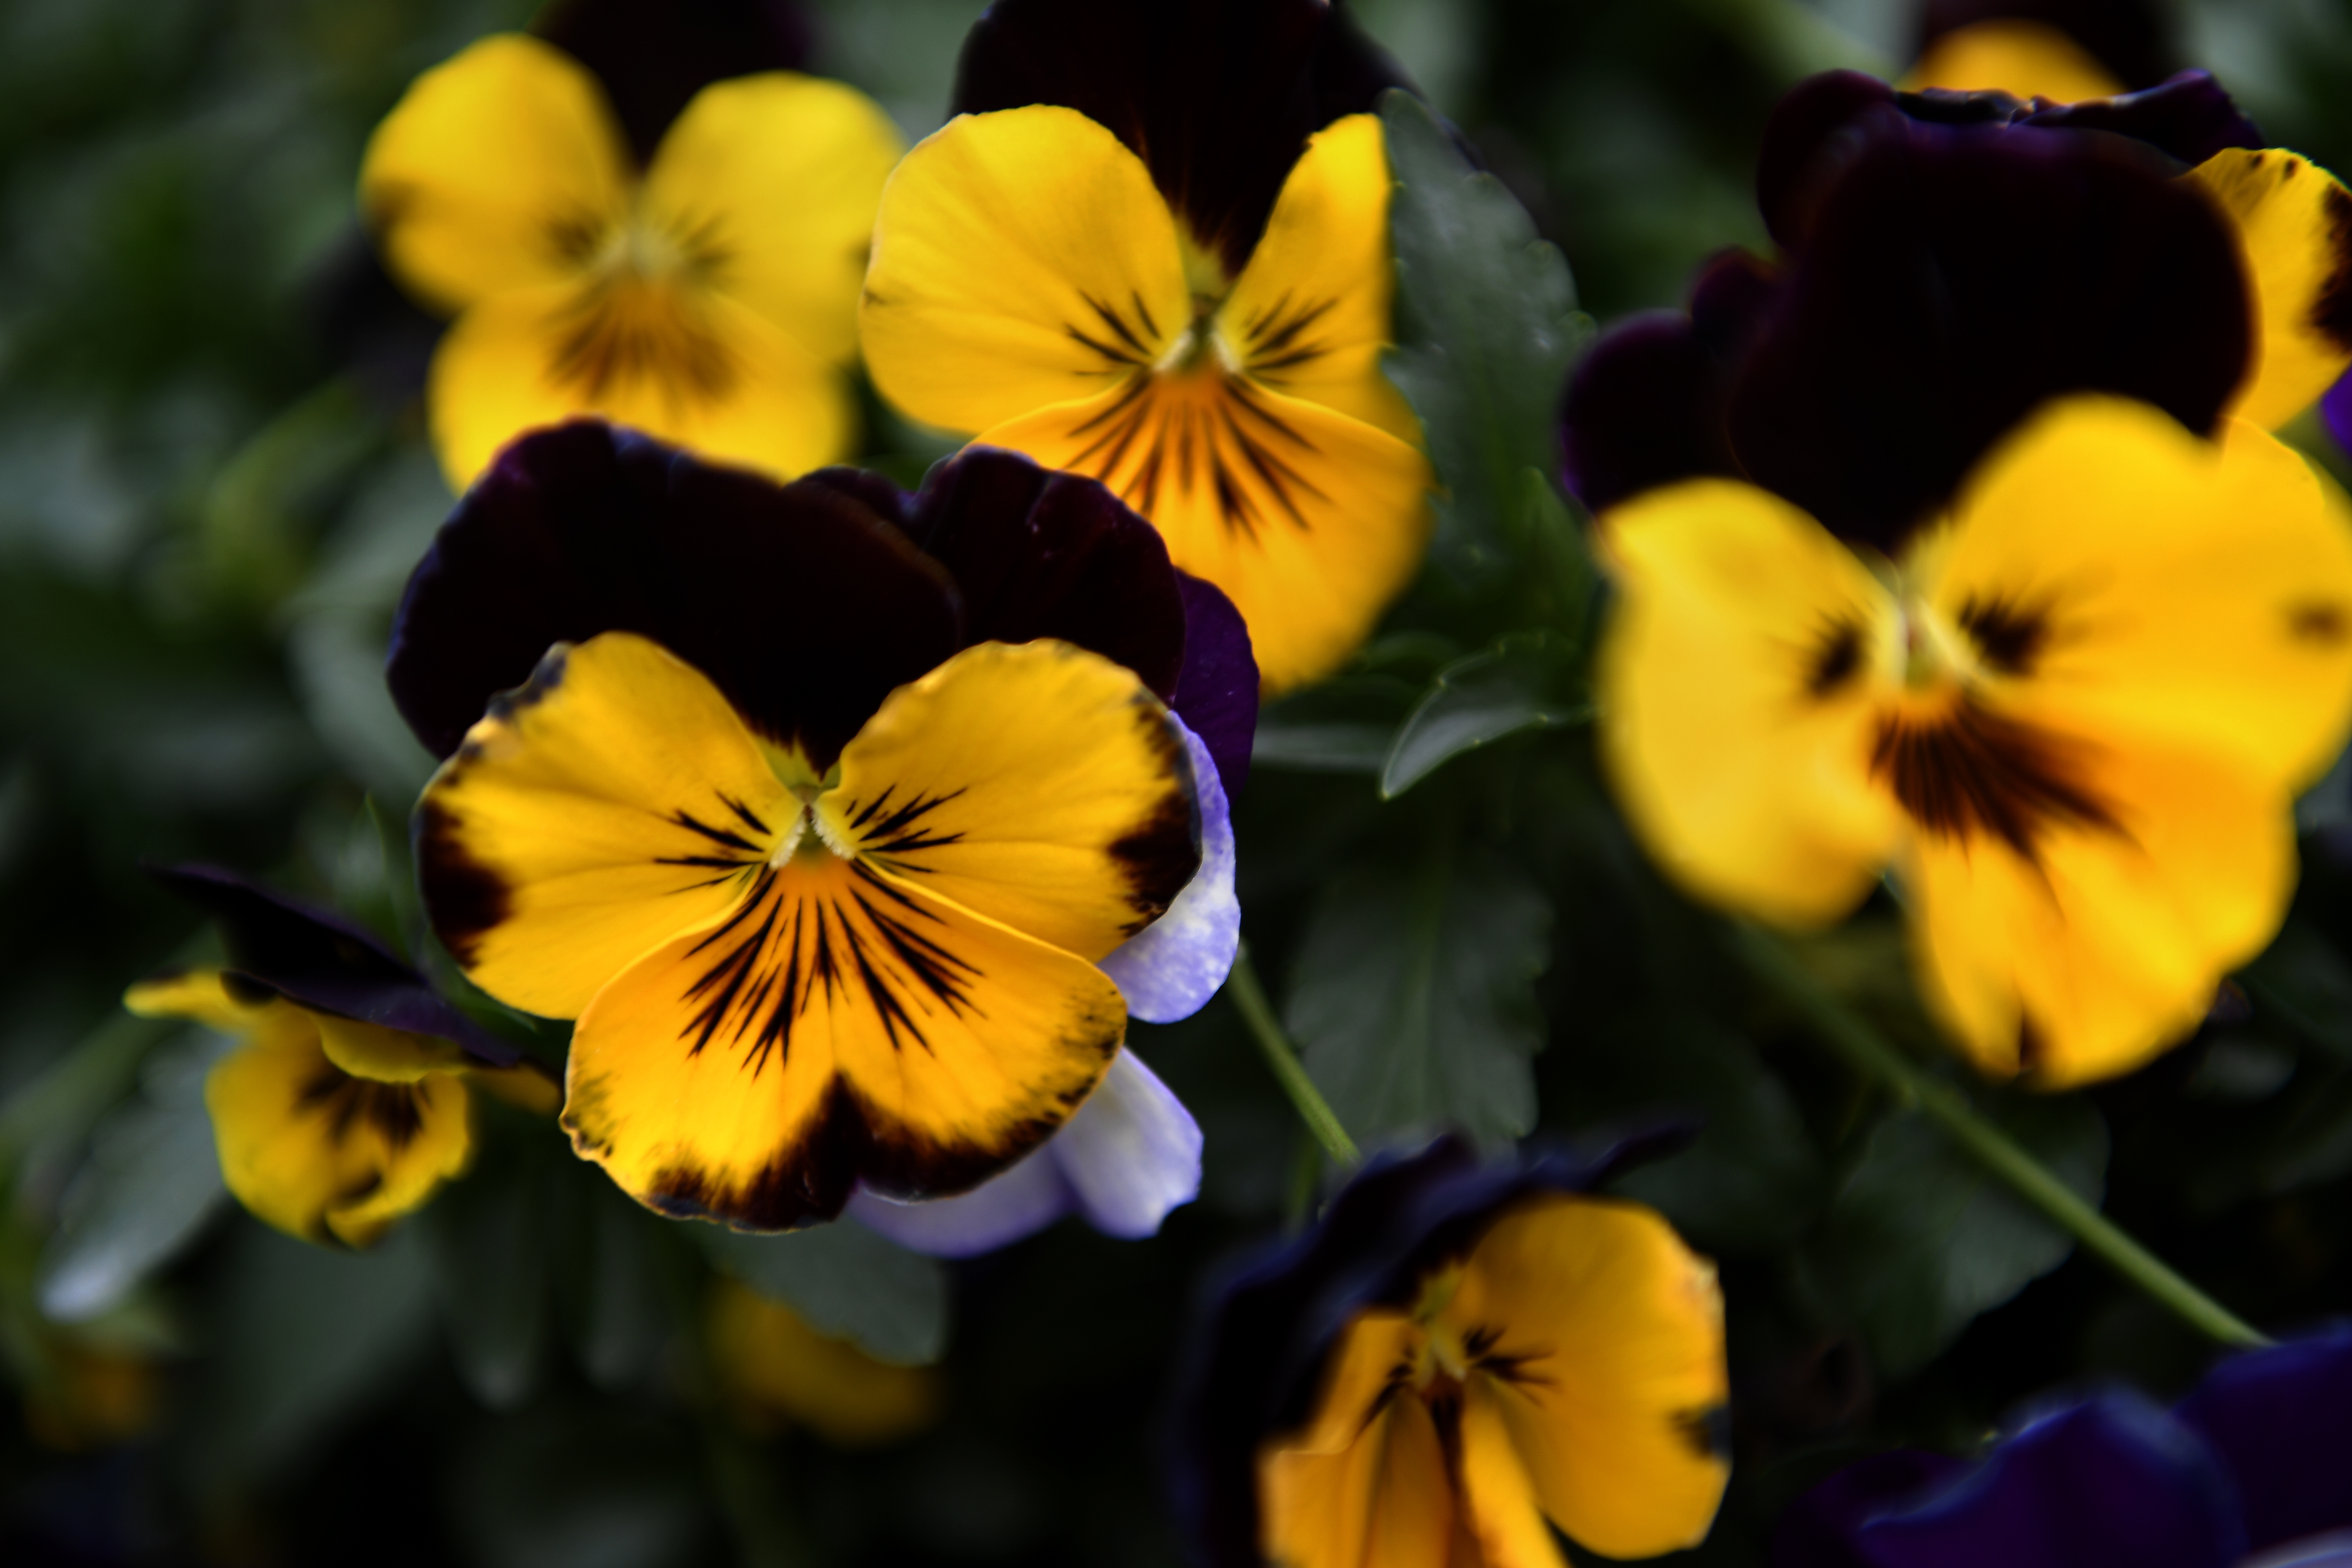 Pansies persist through Colorado's whiplash weather, colorful faces ...